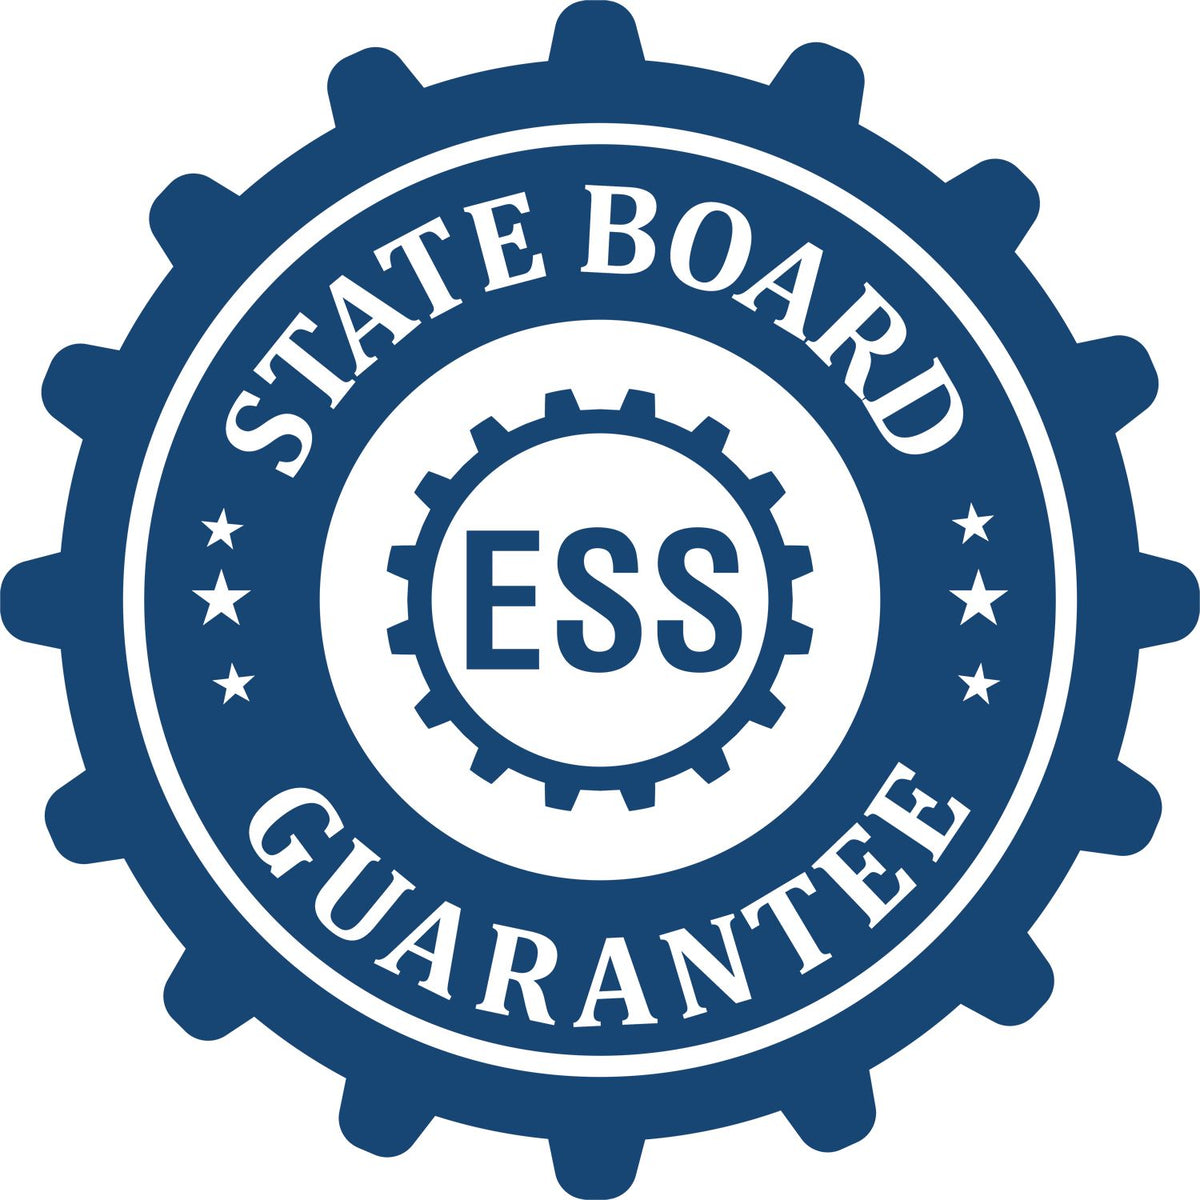 An emblem in a gear shape illustrating a state board guarantee for the State of Kentucky Long Reach Architectural Embossing Seal product.